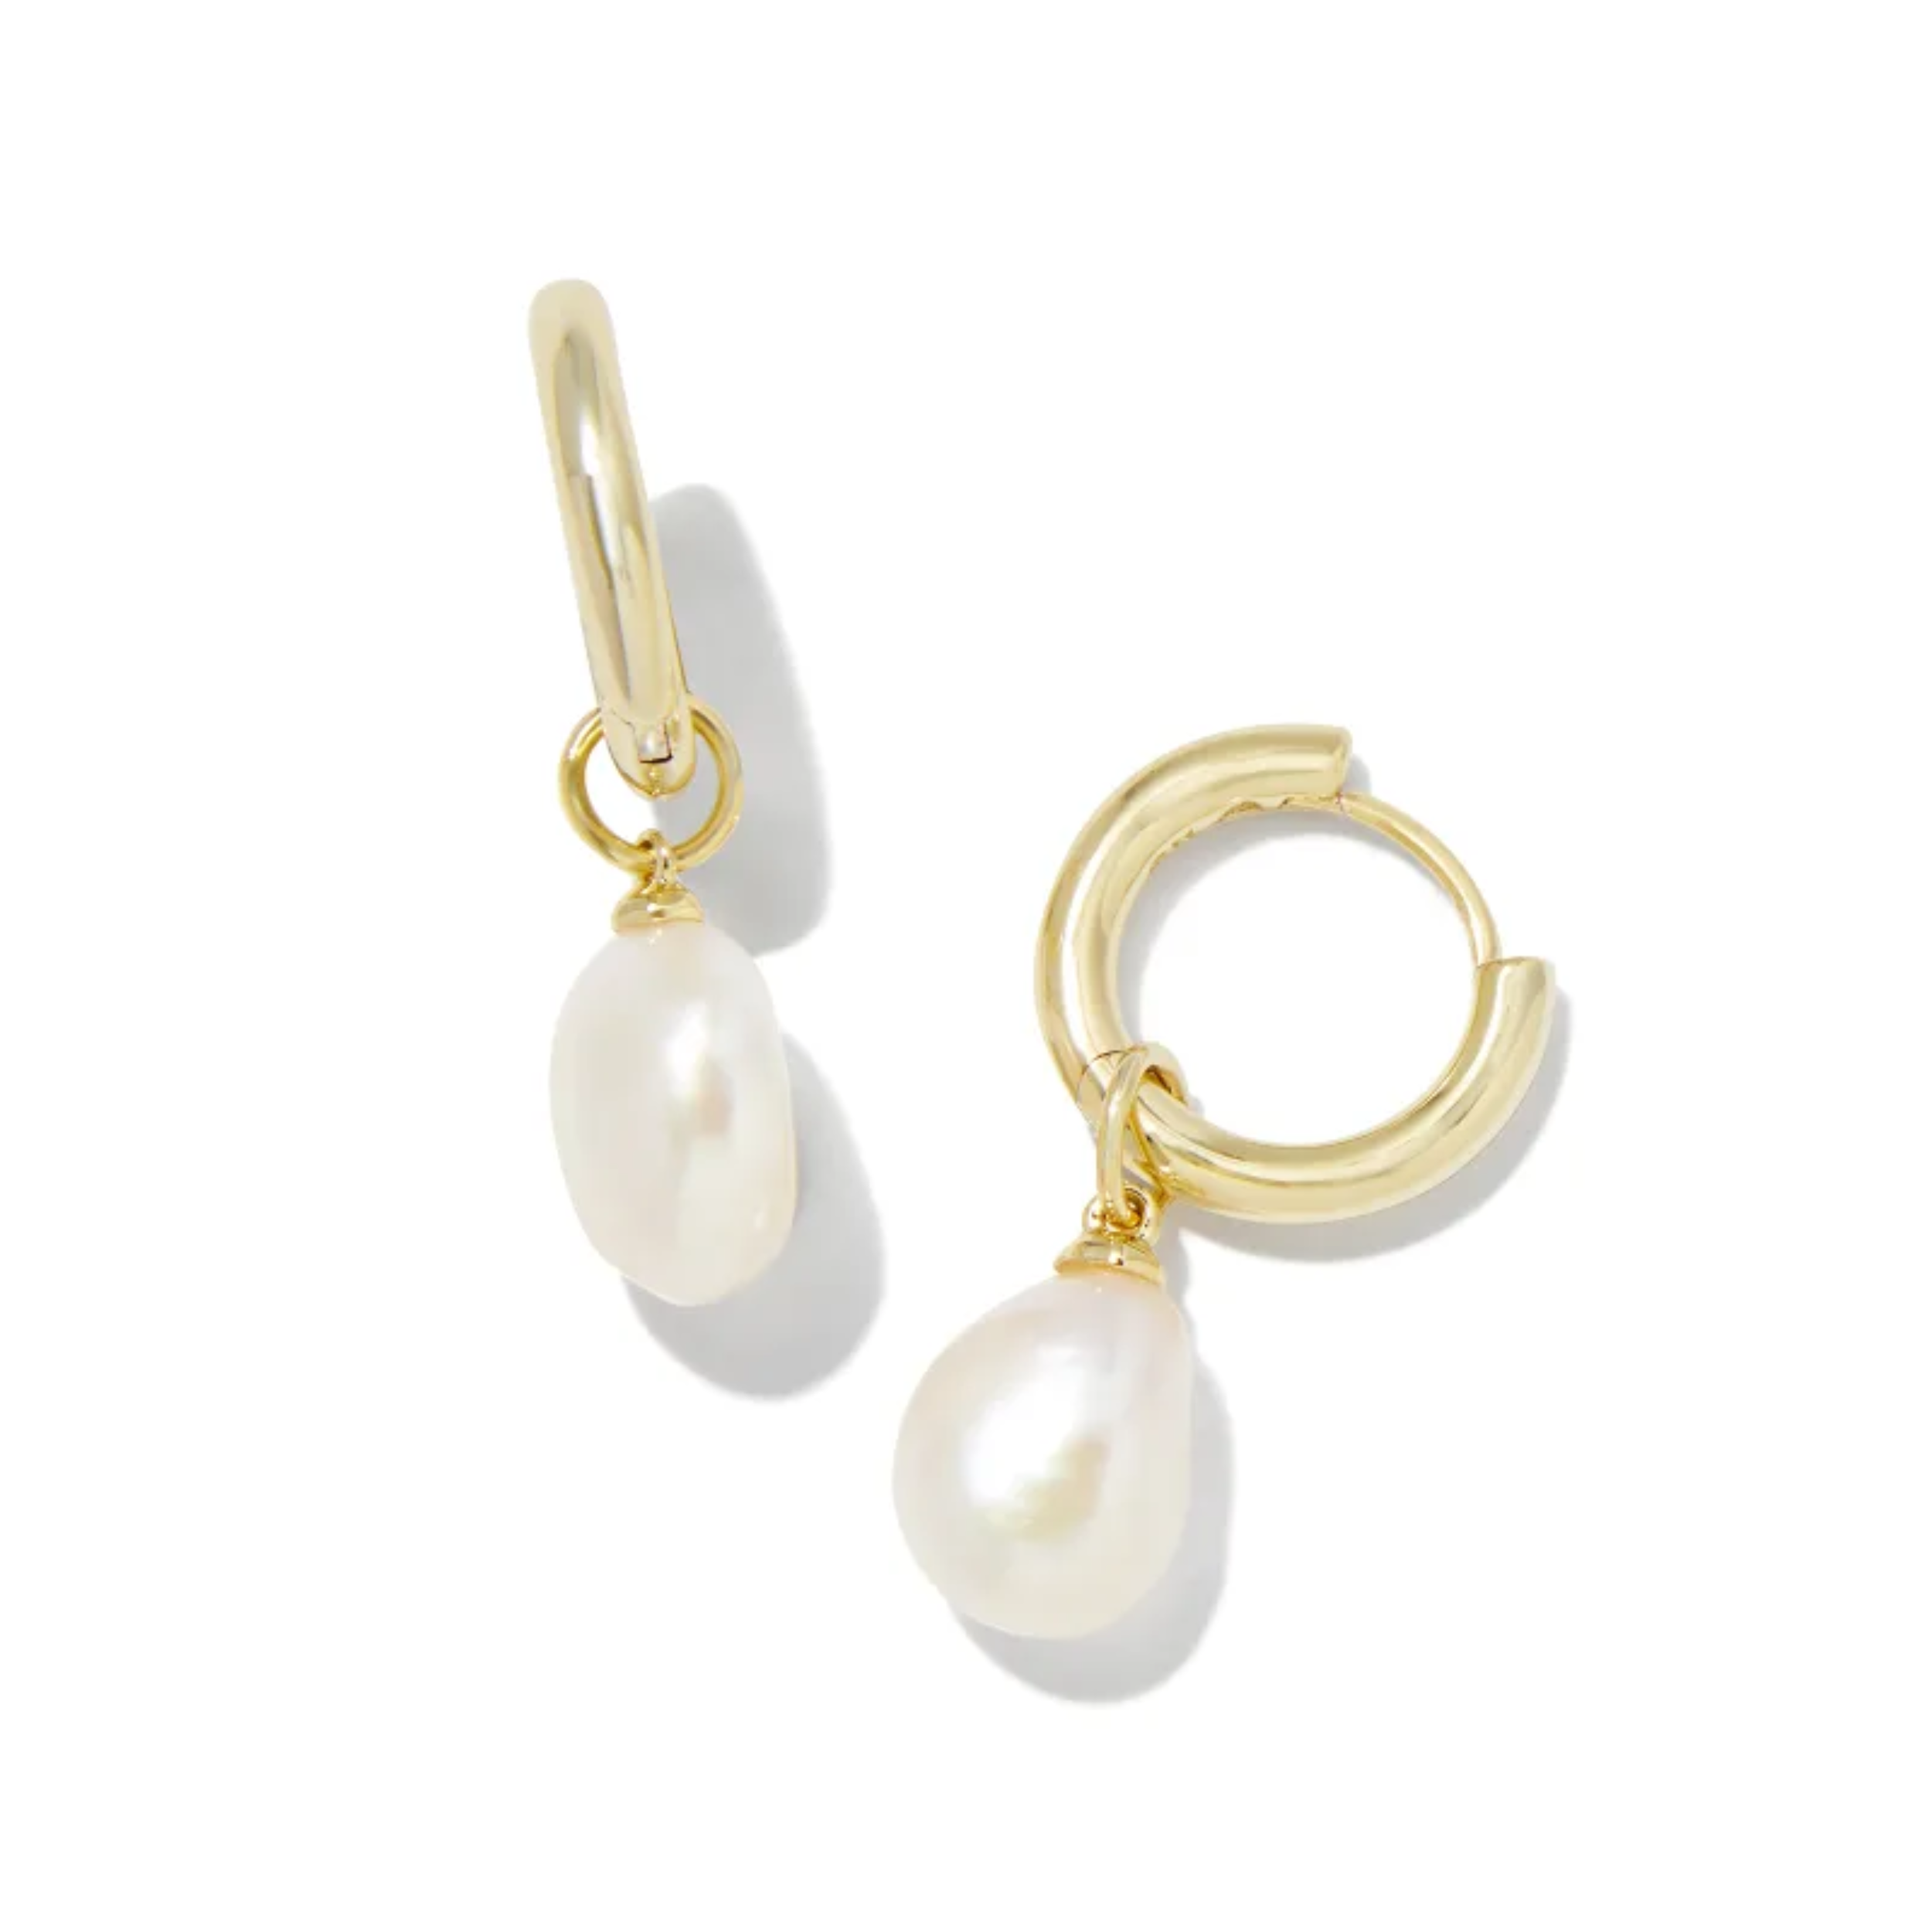 These Willa Gold Huggie Earrings in White Pearl by Kendra Scott are pictured on a white background.